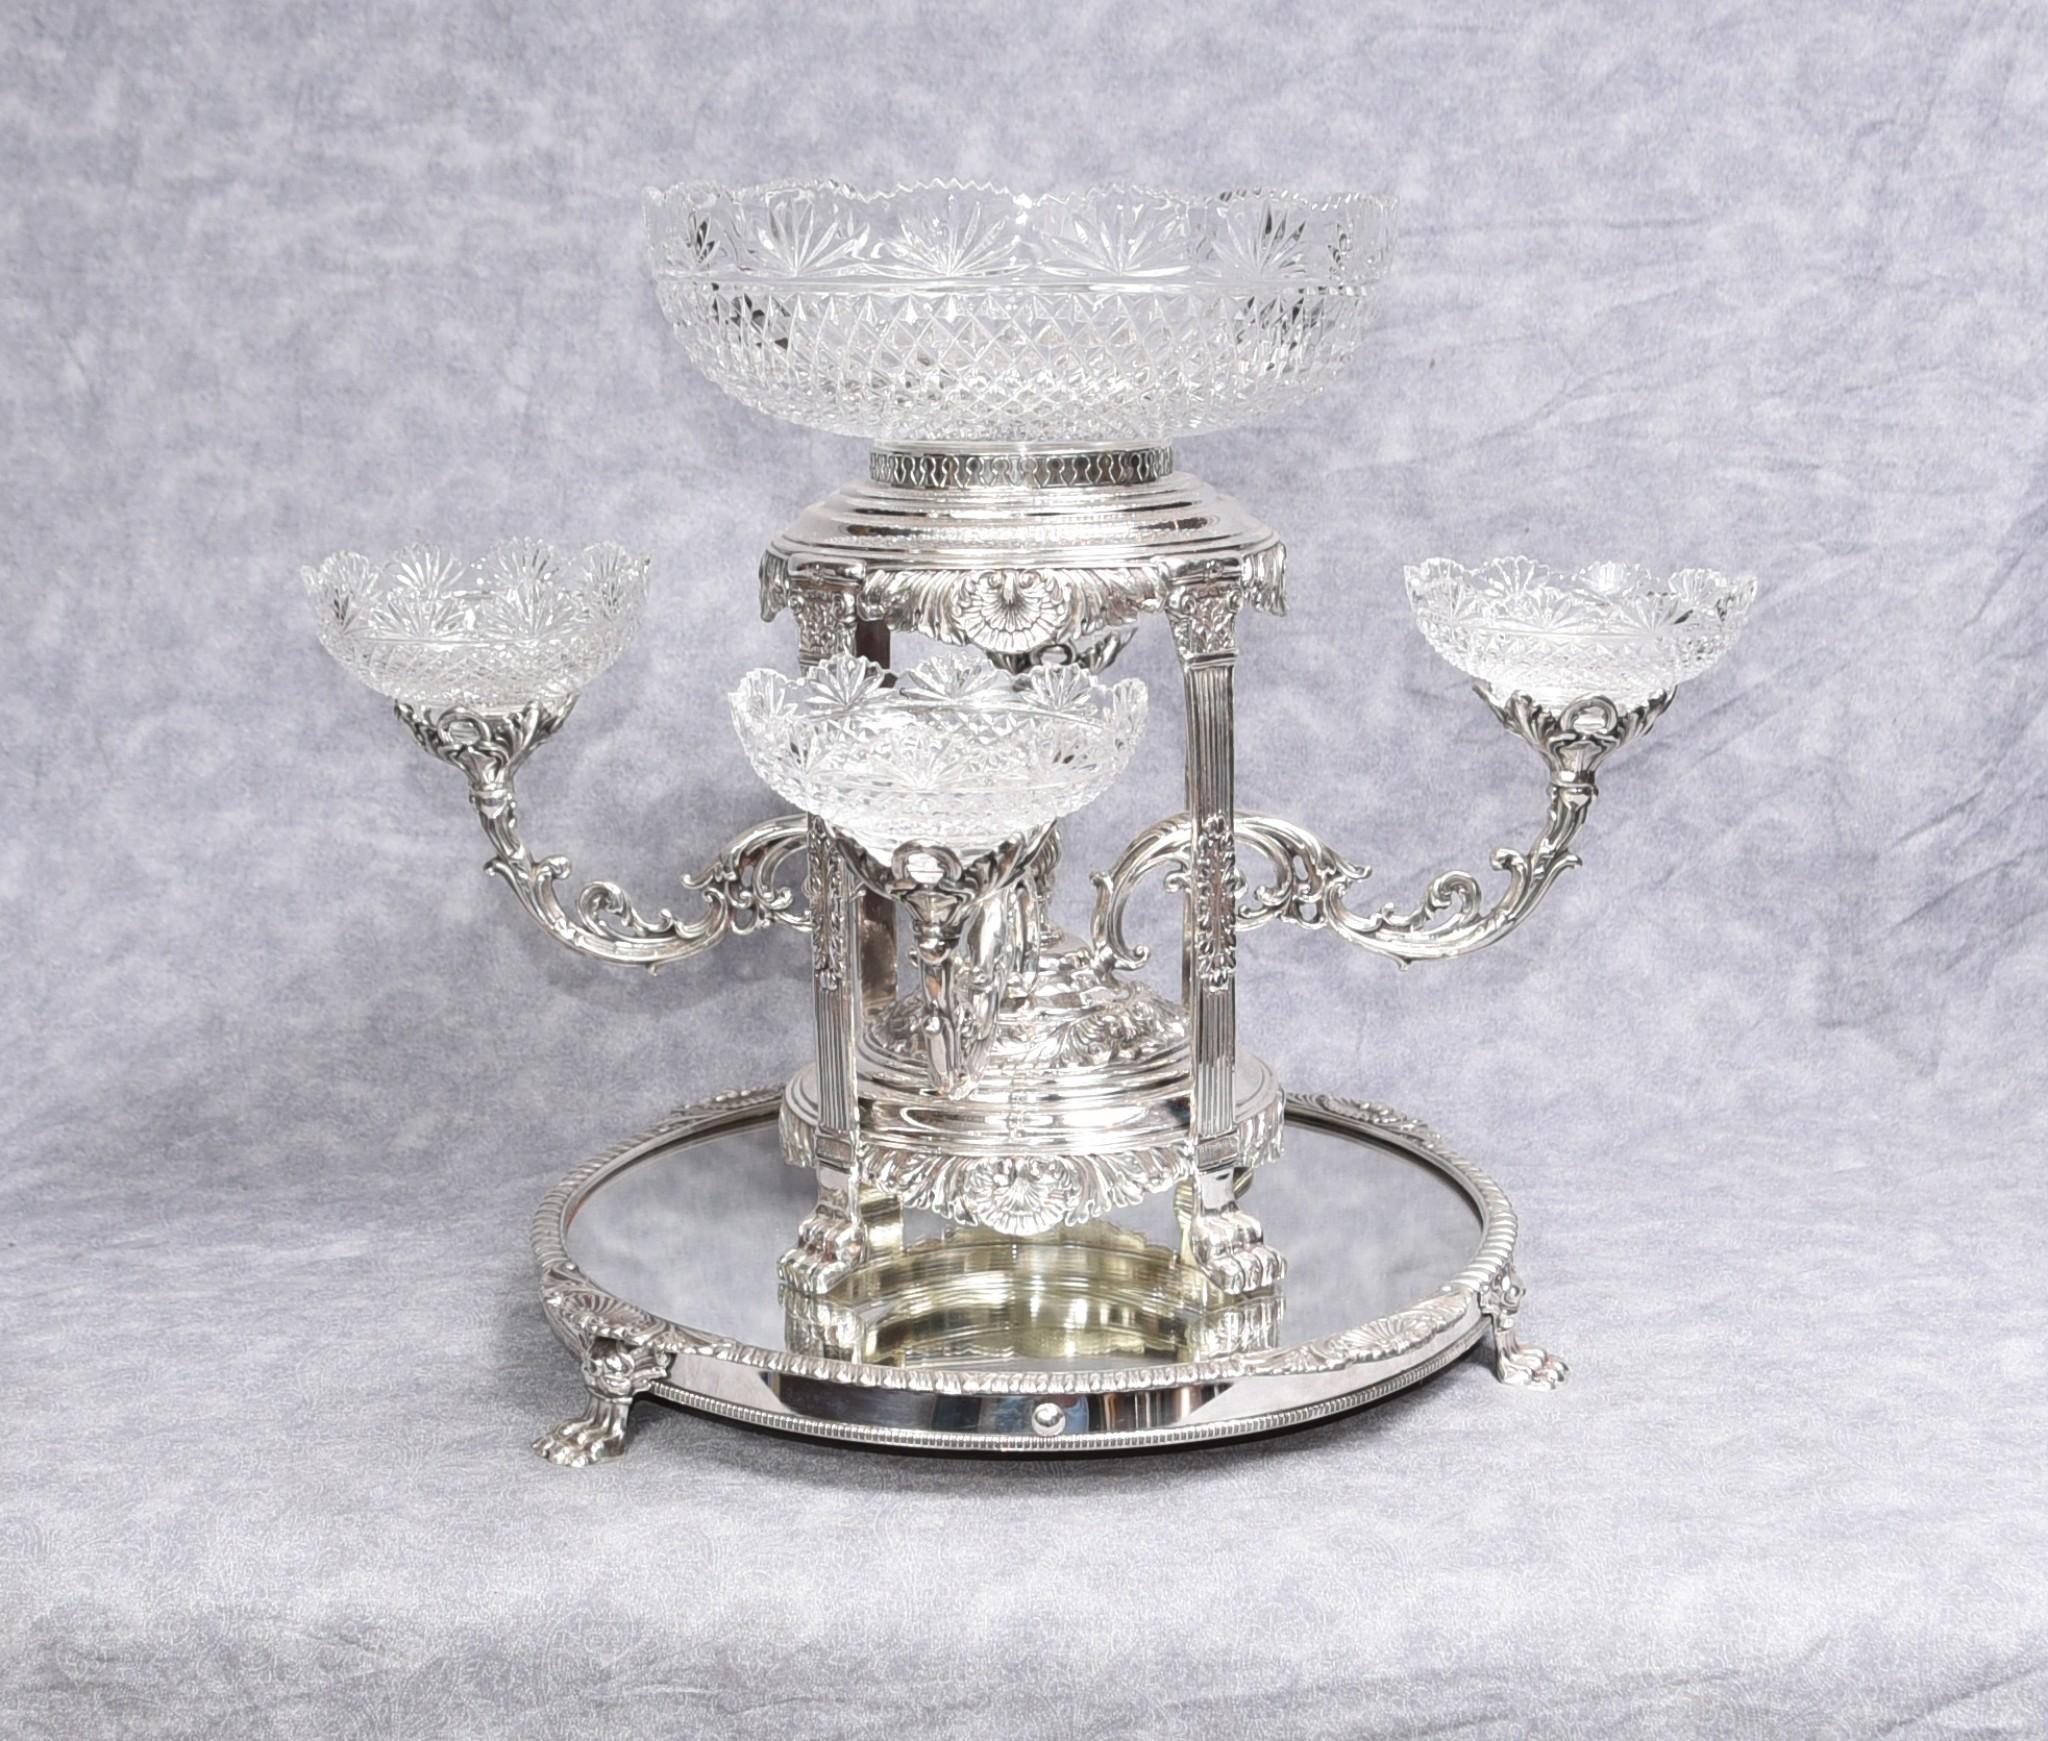 You are viewing an incredible pair of Sheffield silverplate and cut glass epergenes in the manner of Matthew Boulton. The pair have been crafted from silver plate and crystal glass and stand on the mirrored silver stands.

It's really hard to know